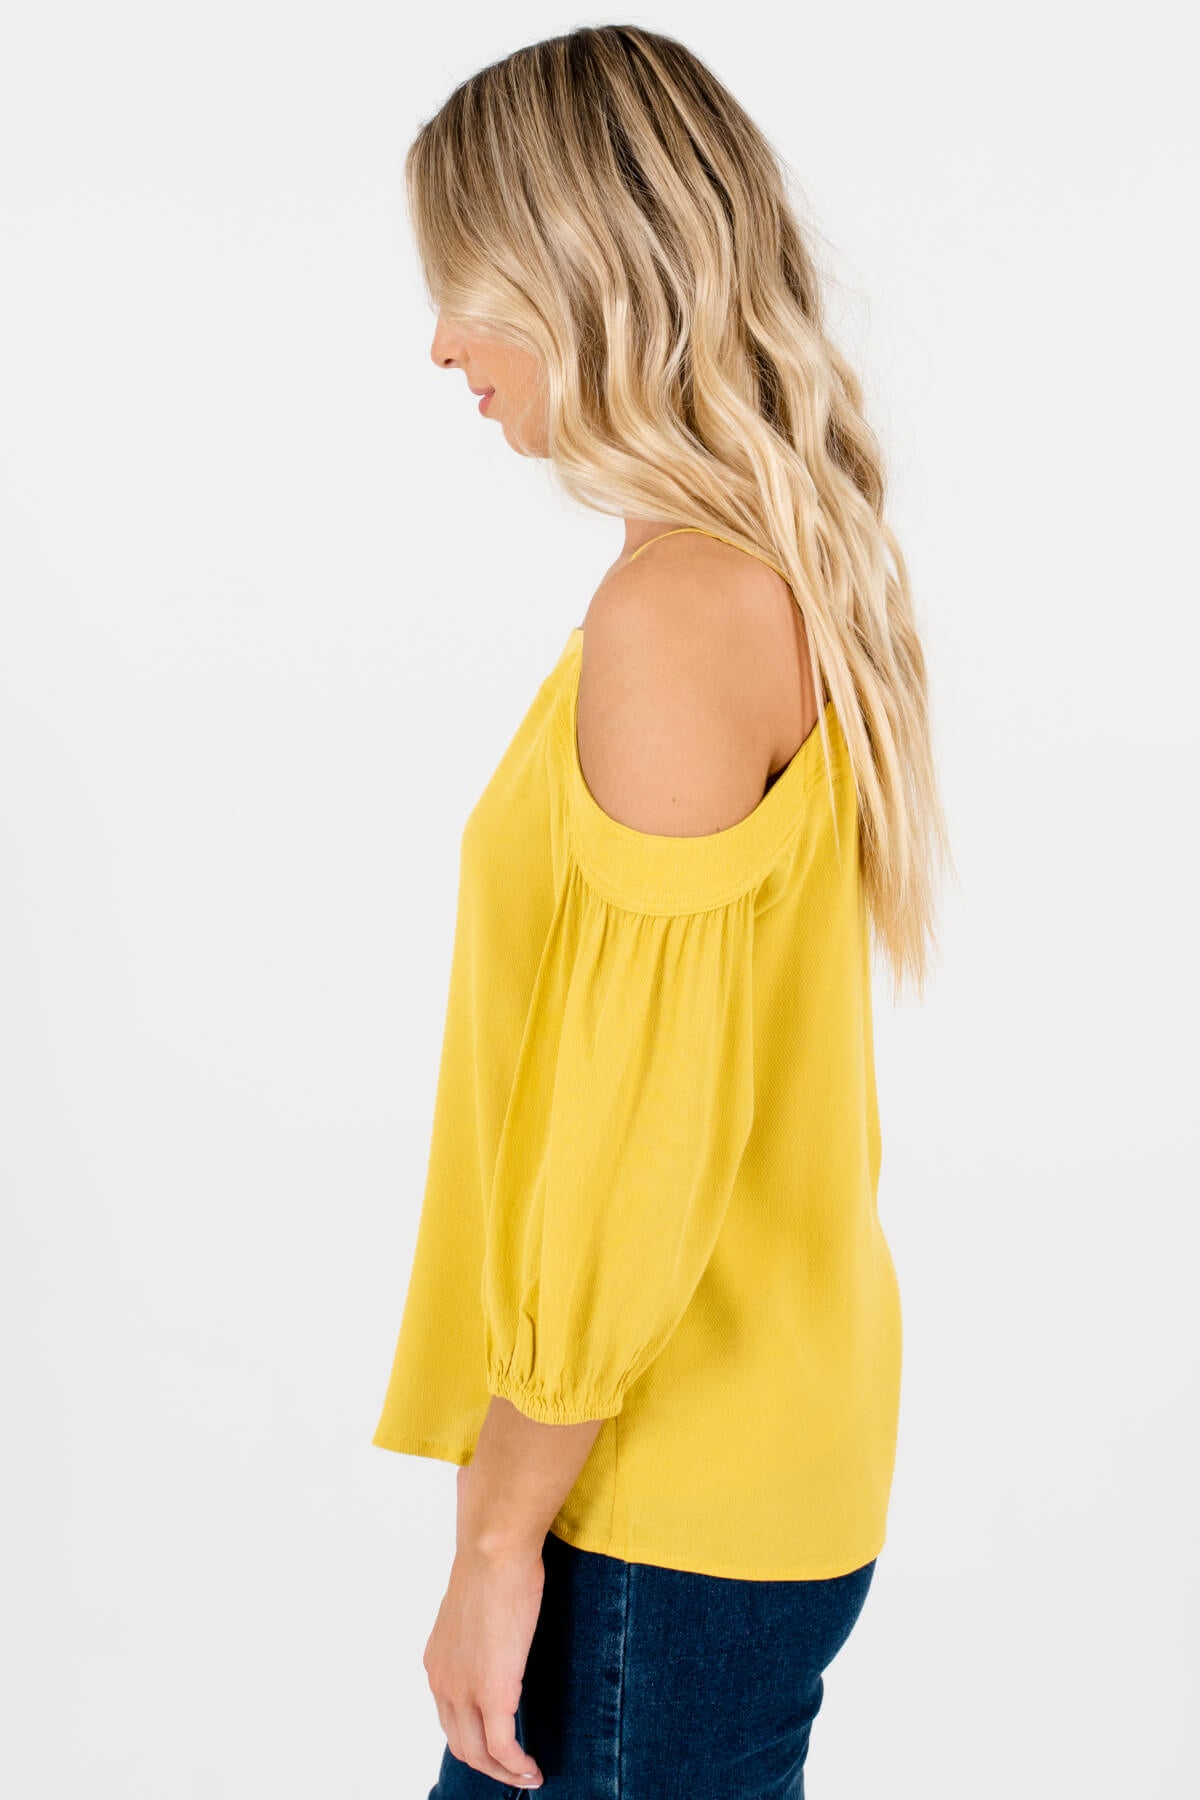 Yellow Pleated Accents Sleeve Boutique Tops for Women